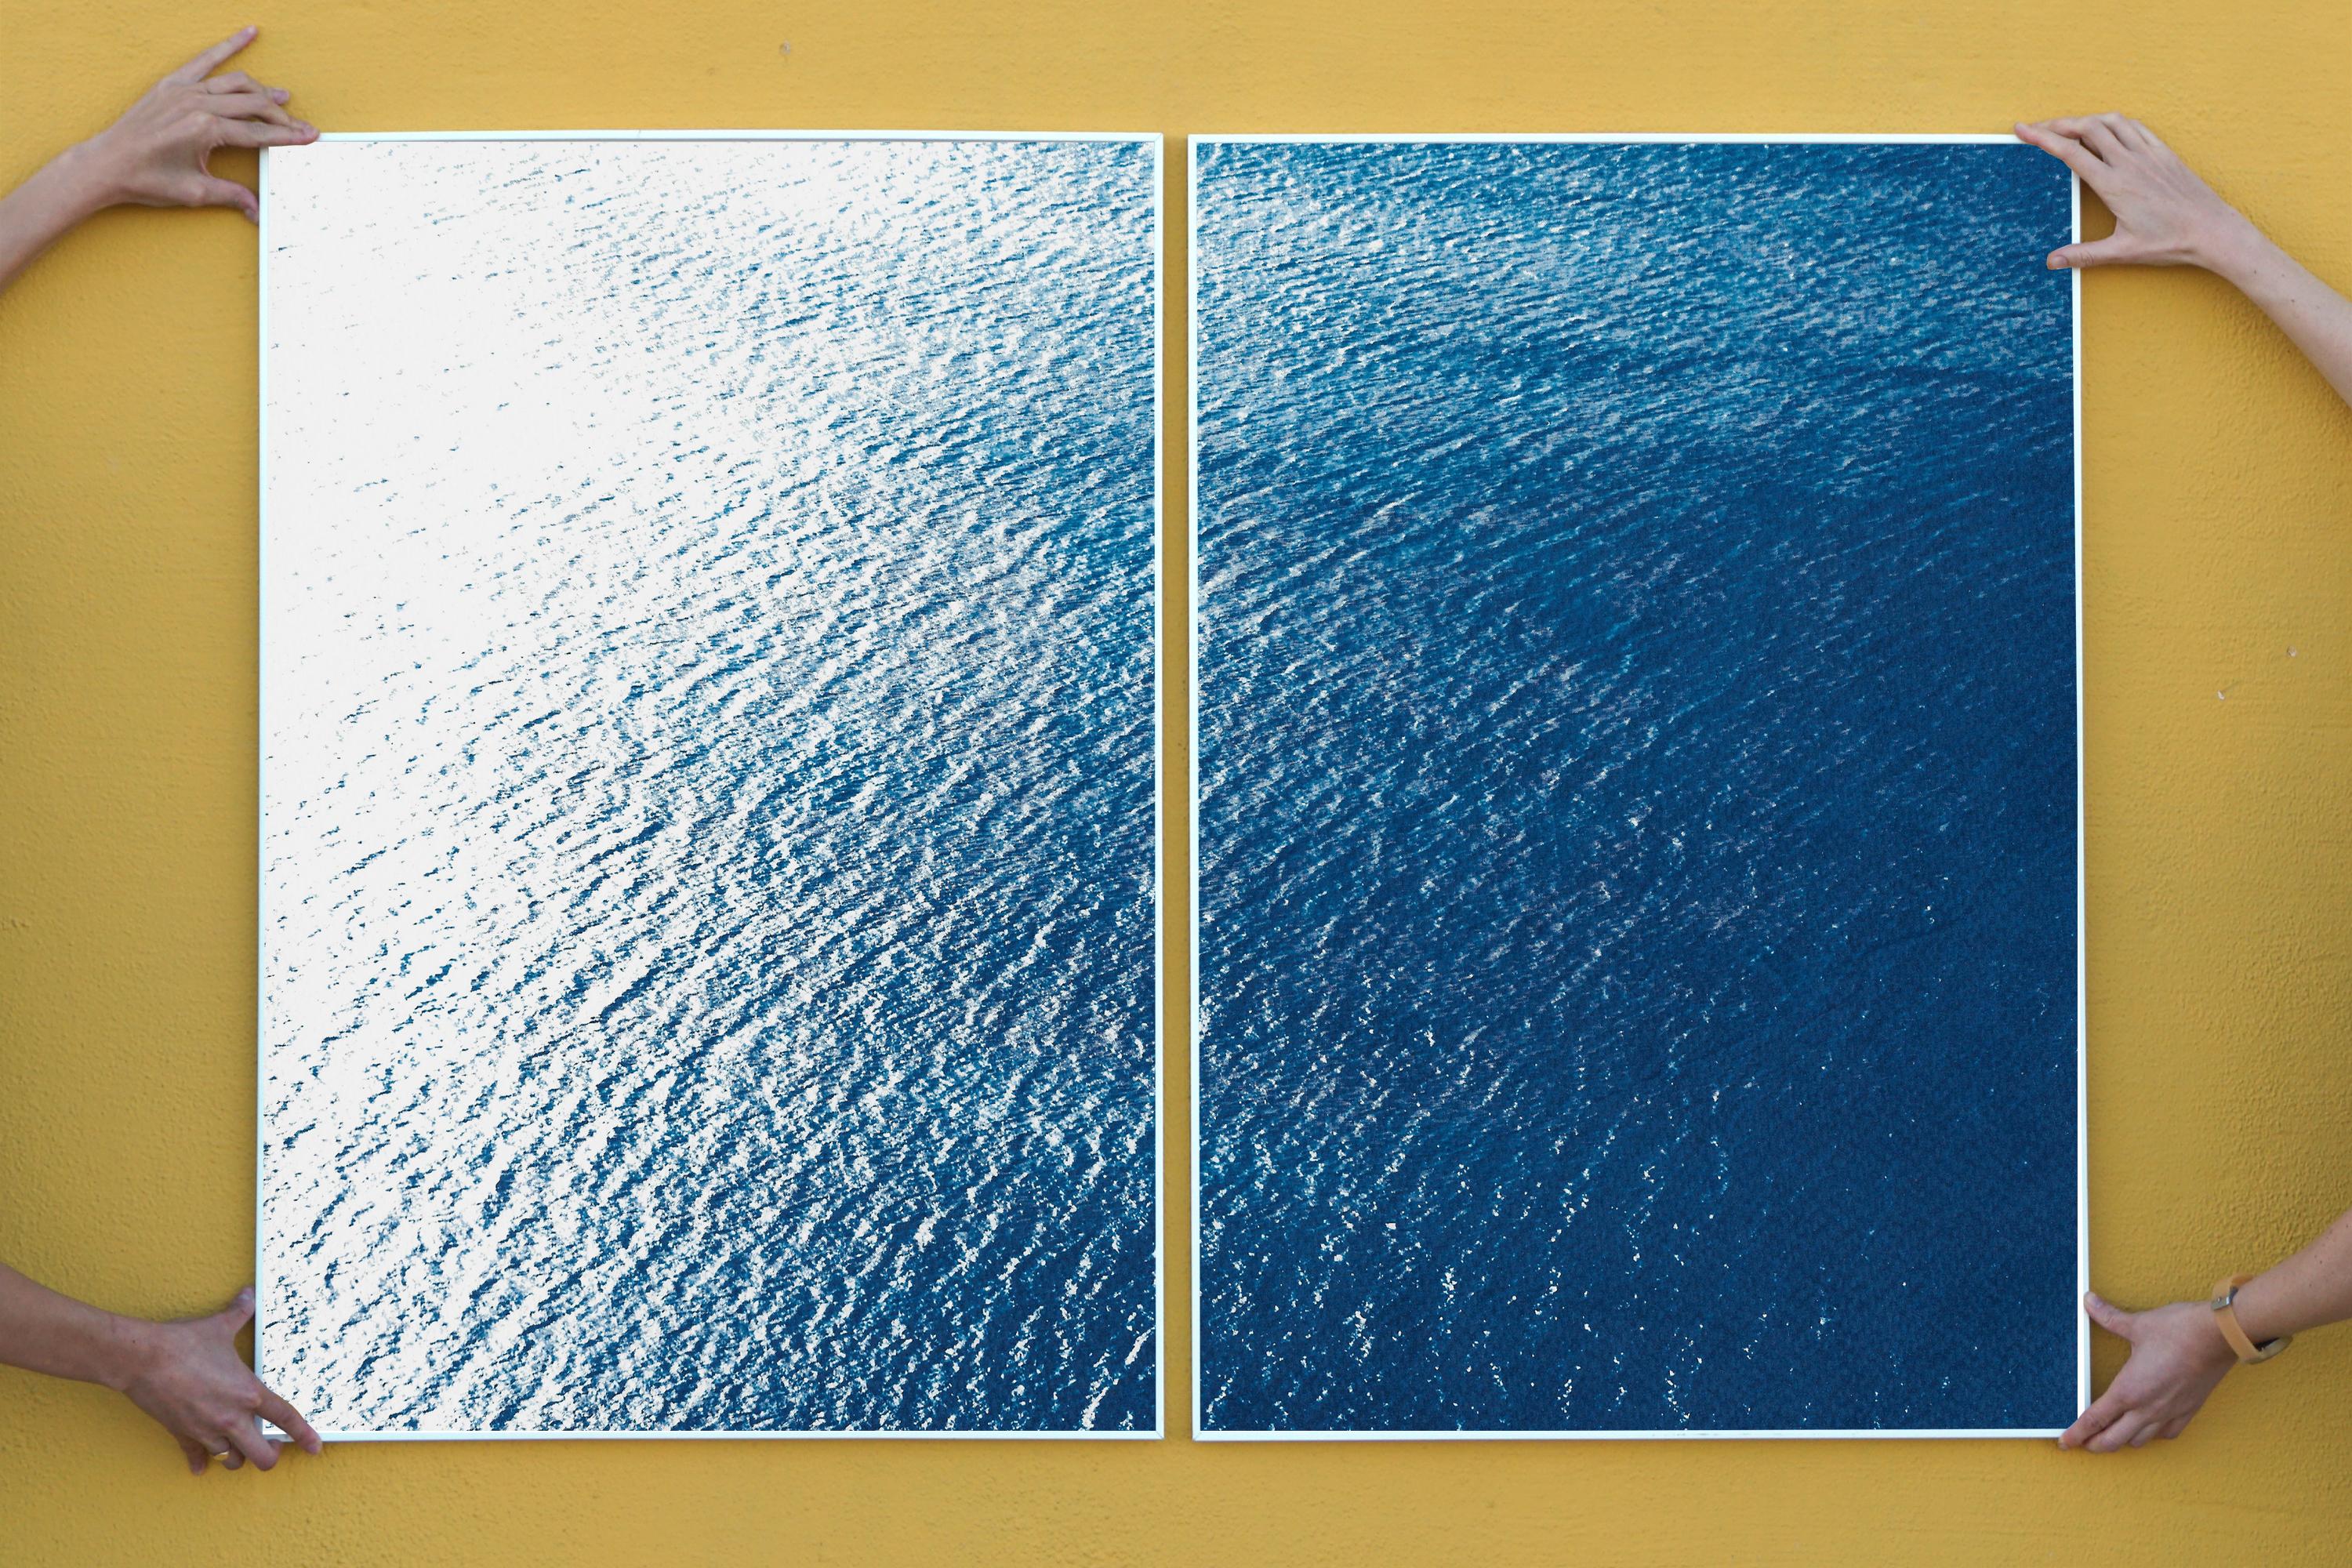 Smooth Bay in the Mediterranean, Classic Blue Diptych, Zen Seascape Coastal Life 3